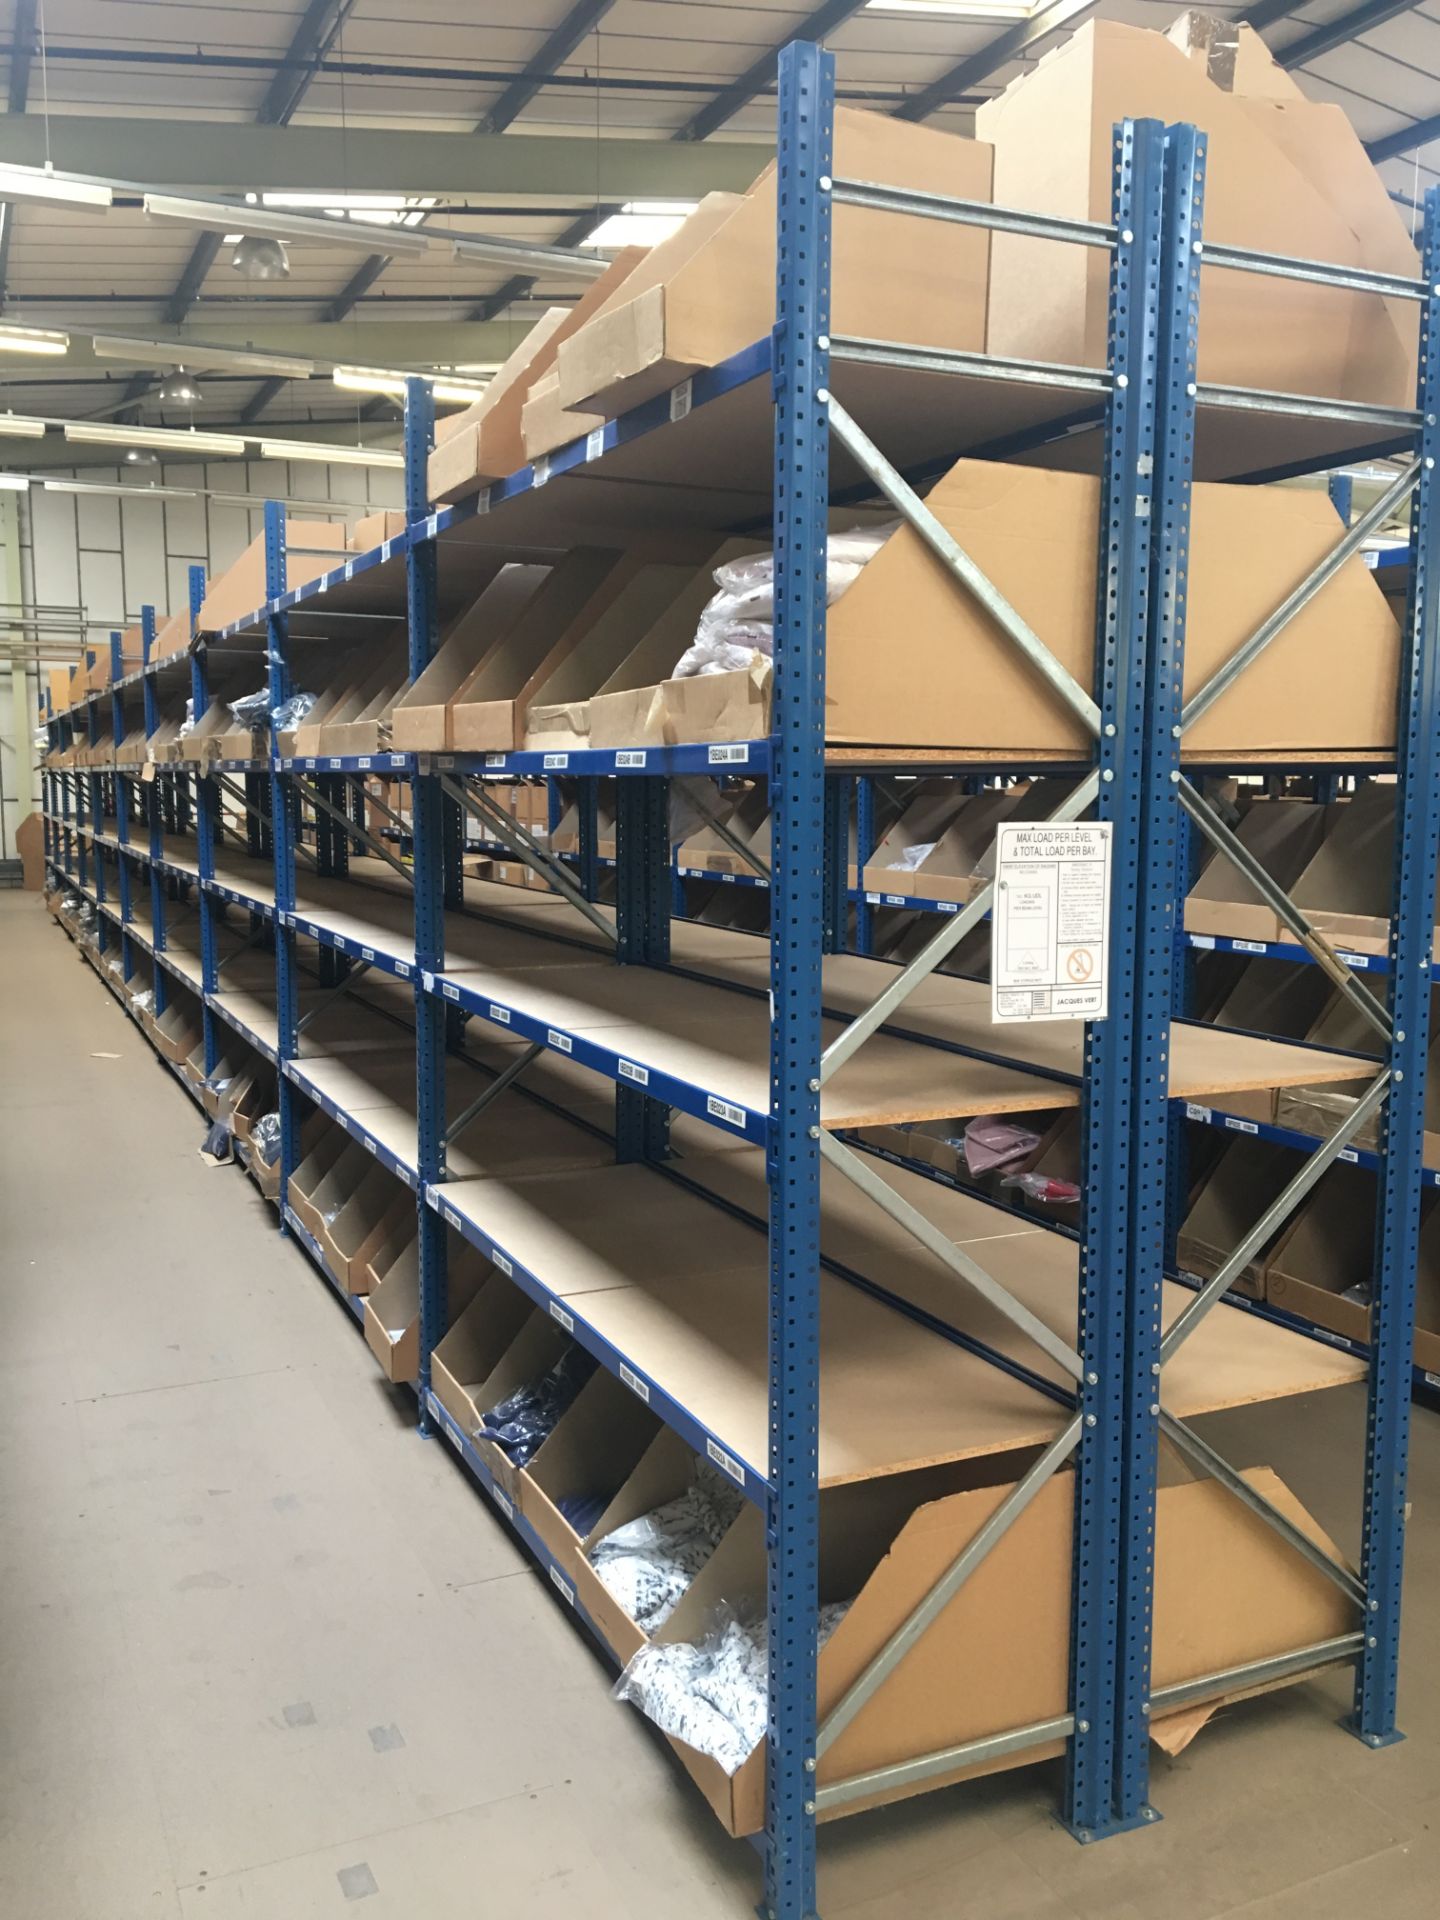 Approximately 380 bays of Lightweight blue metal quick form racking